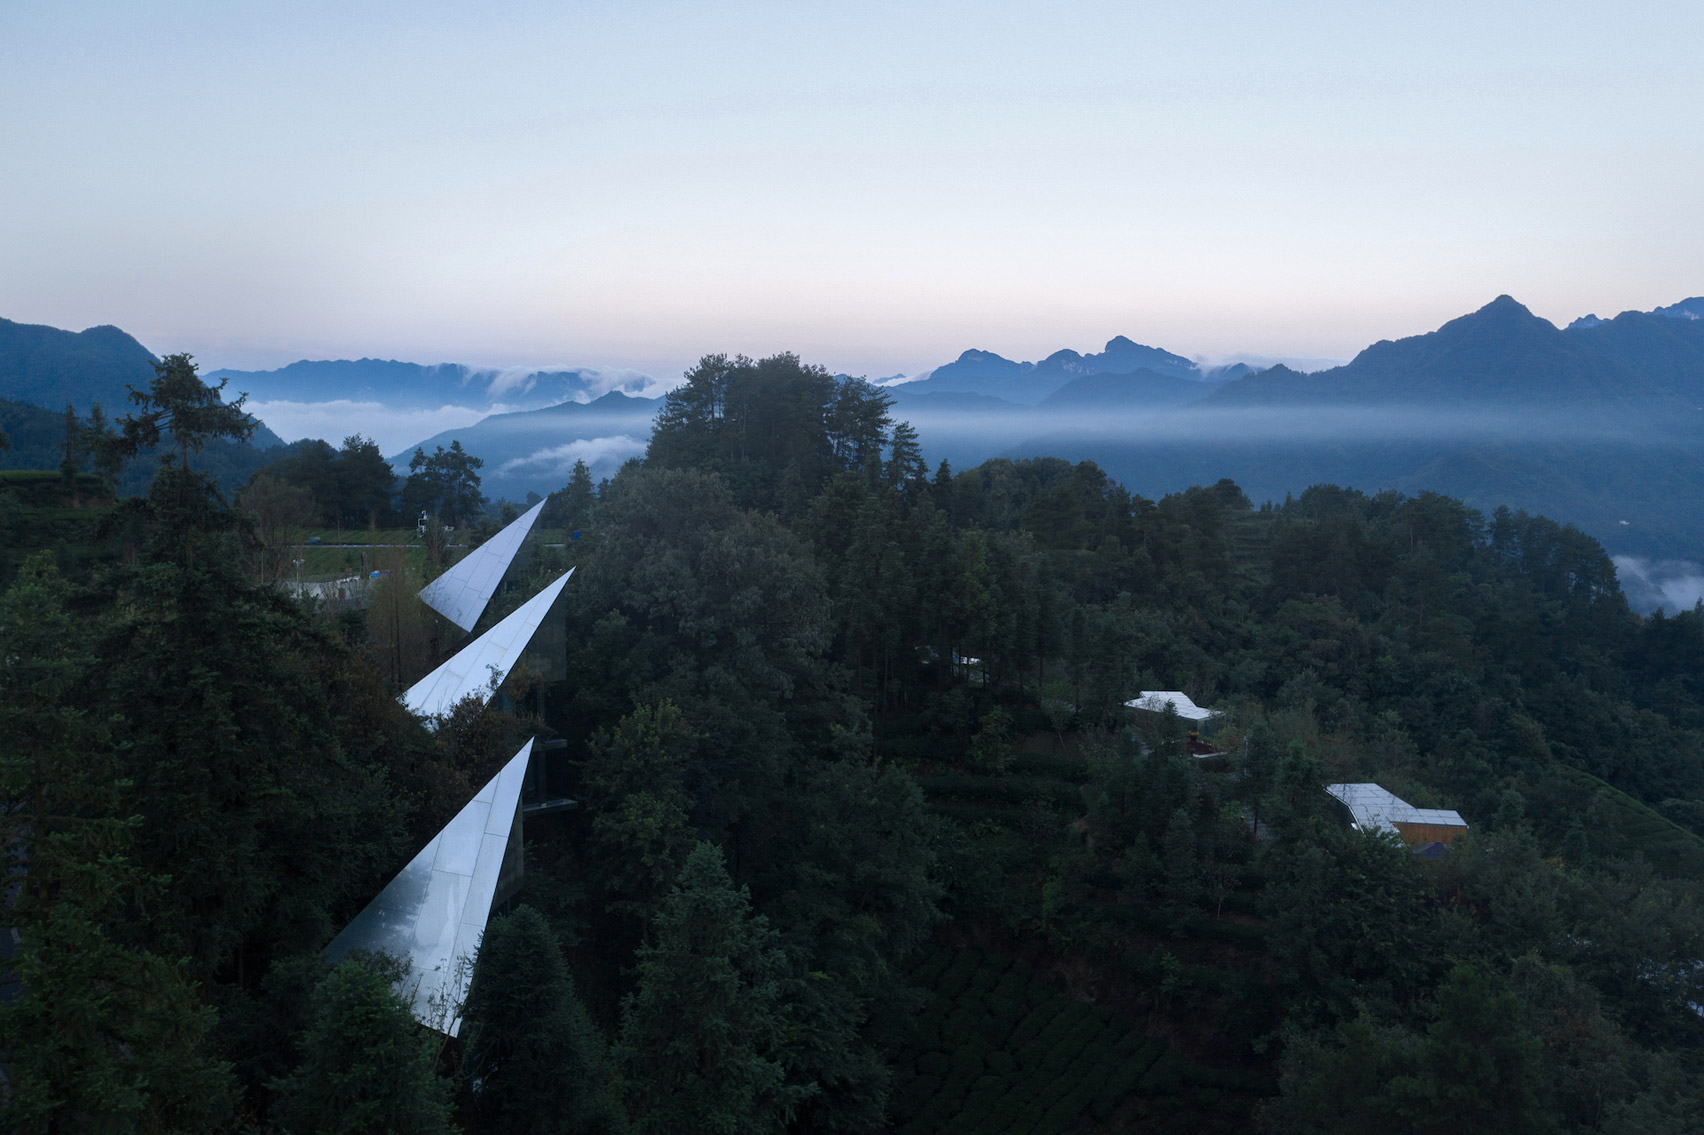 Mirrored "spaceships" of Mountain and Cloud Cabins by Wiki World and Advanced Architecture Lab